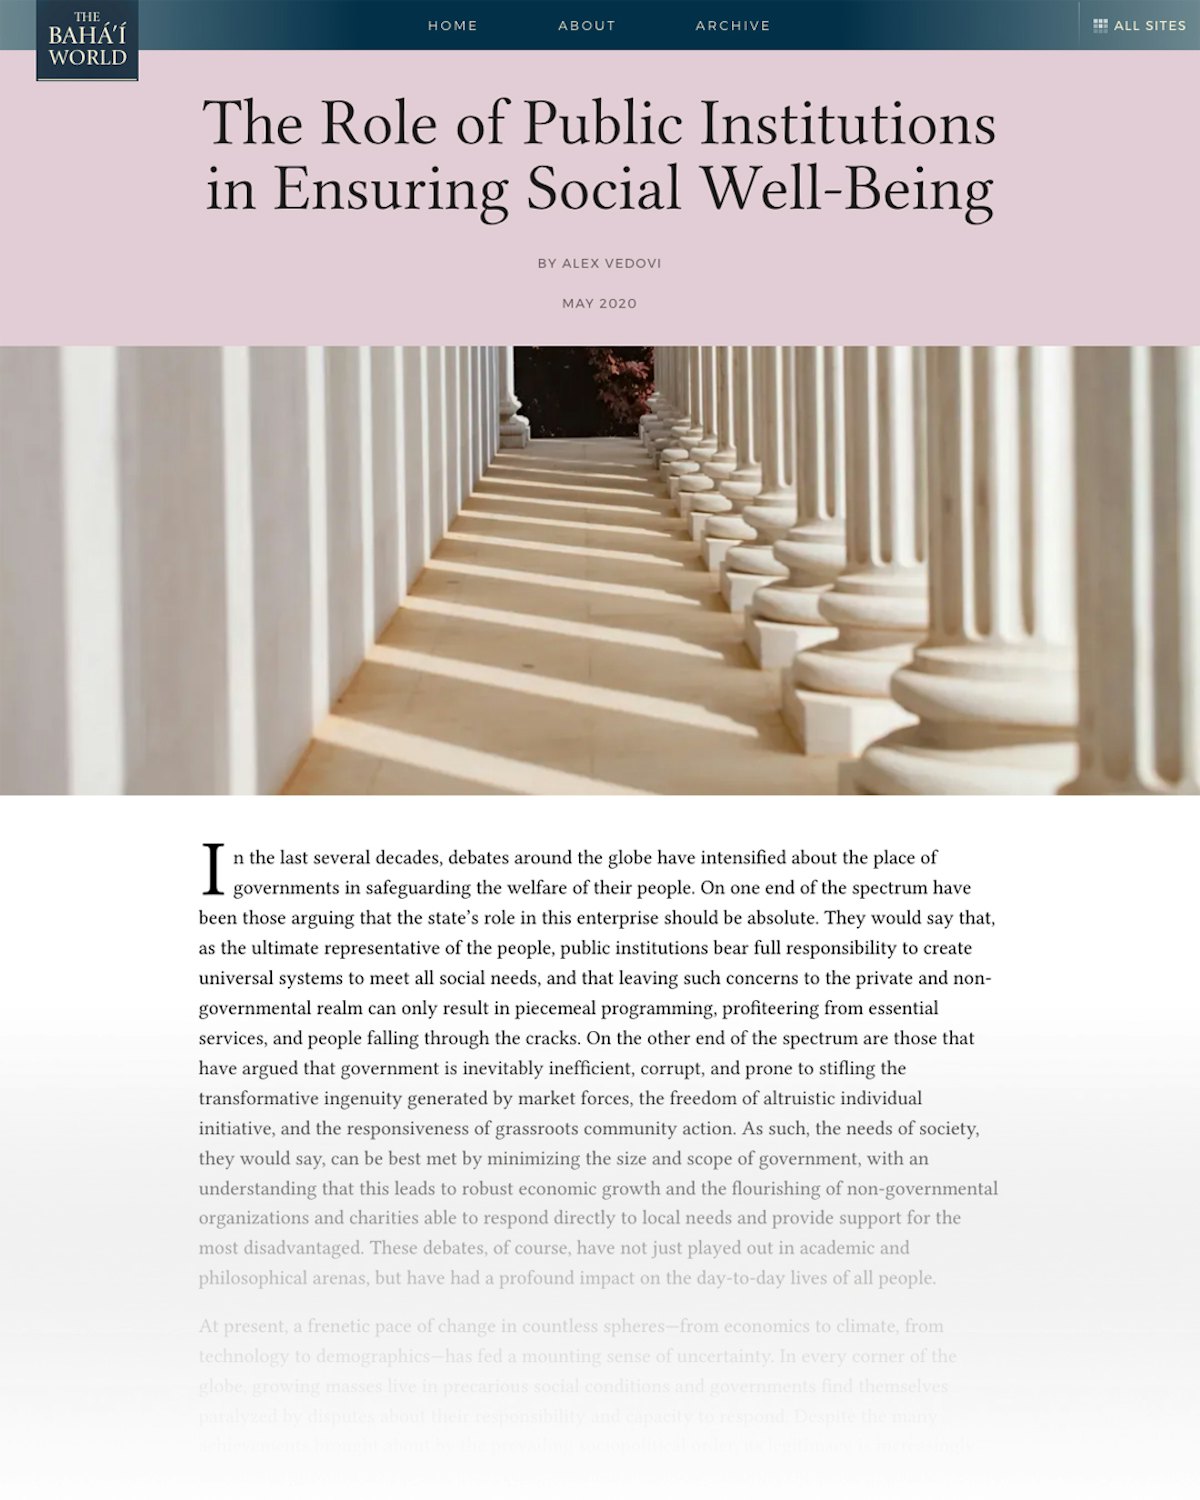 A new article on The Baha’i World website entitled “The Role of Public Institutions in Ensuring Social Well-Being” looks at questions around government’s role in social welfare.